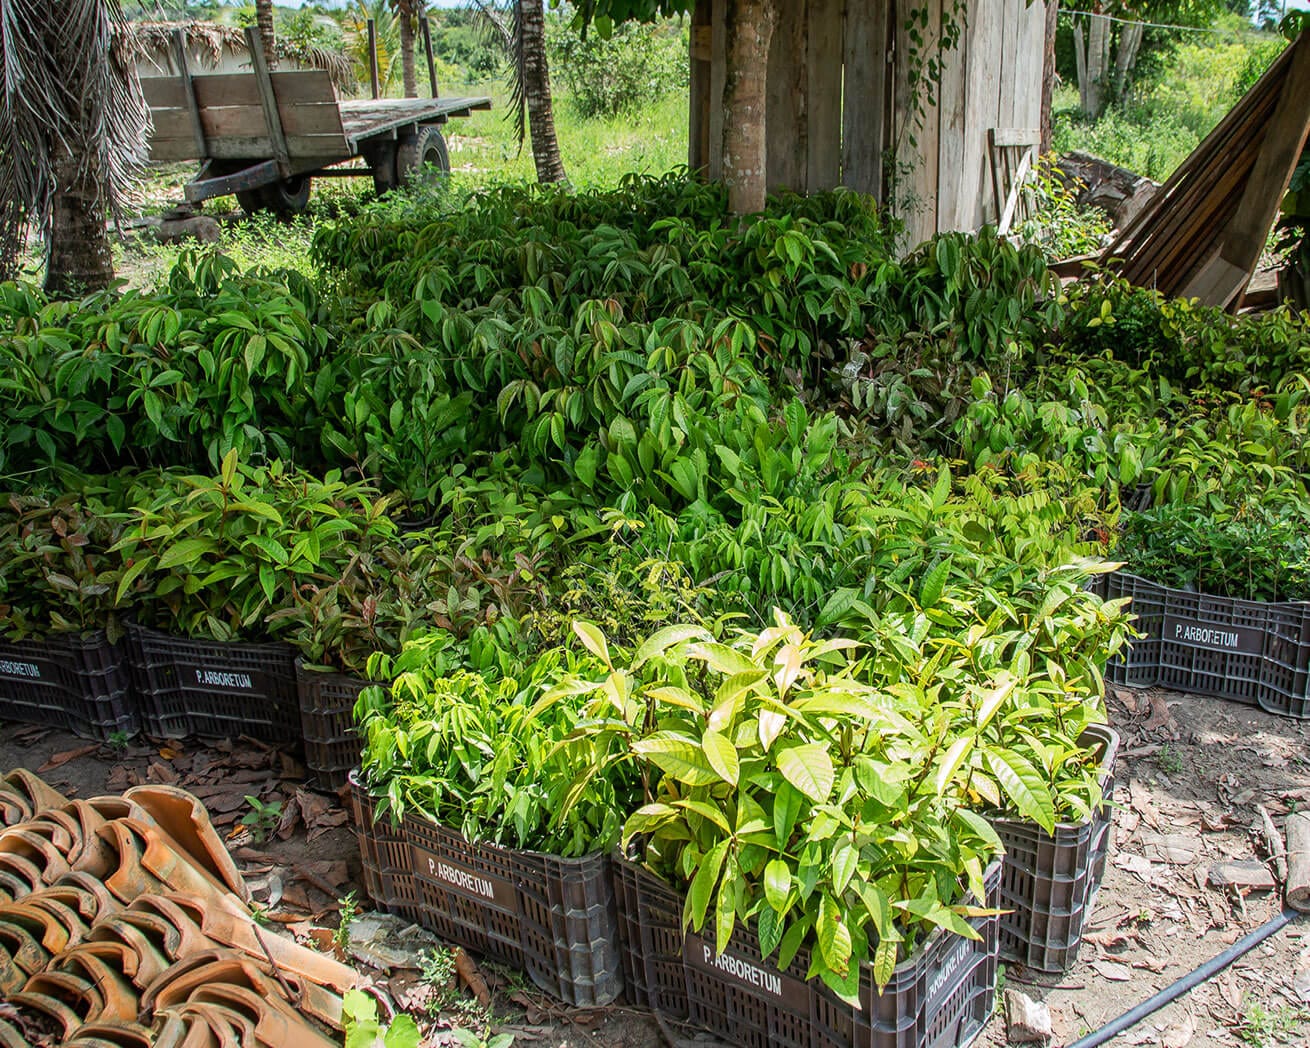 Tree saplings in crates in South America